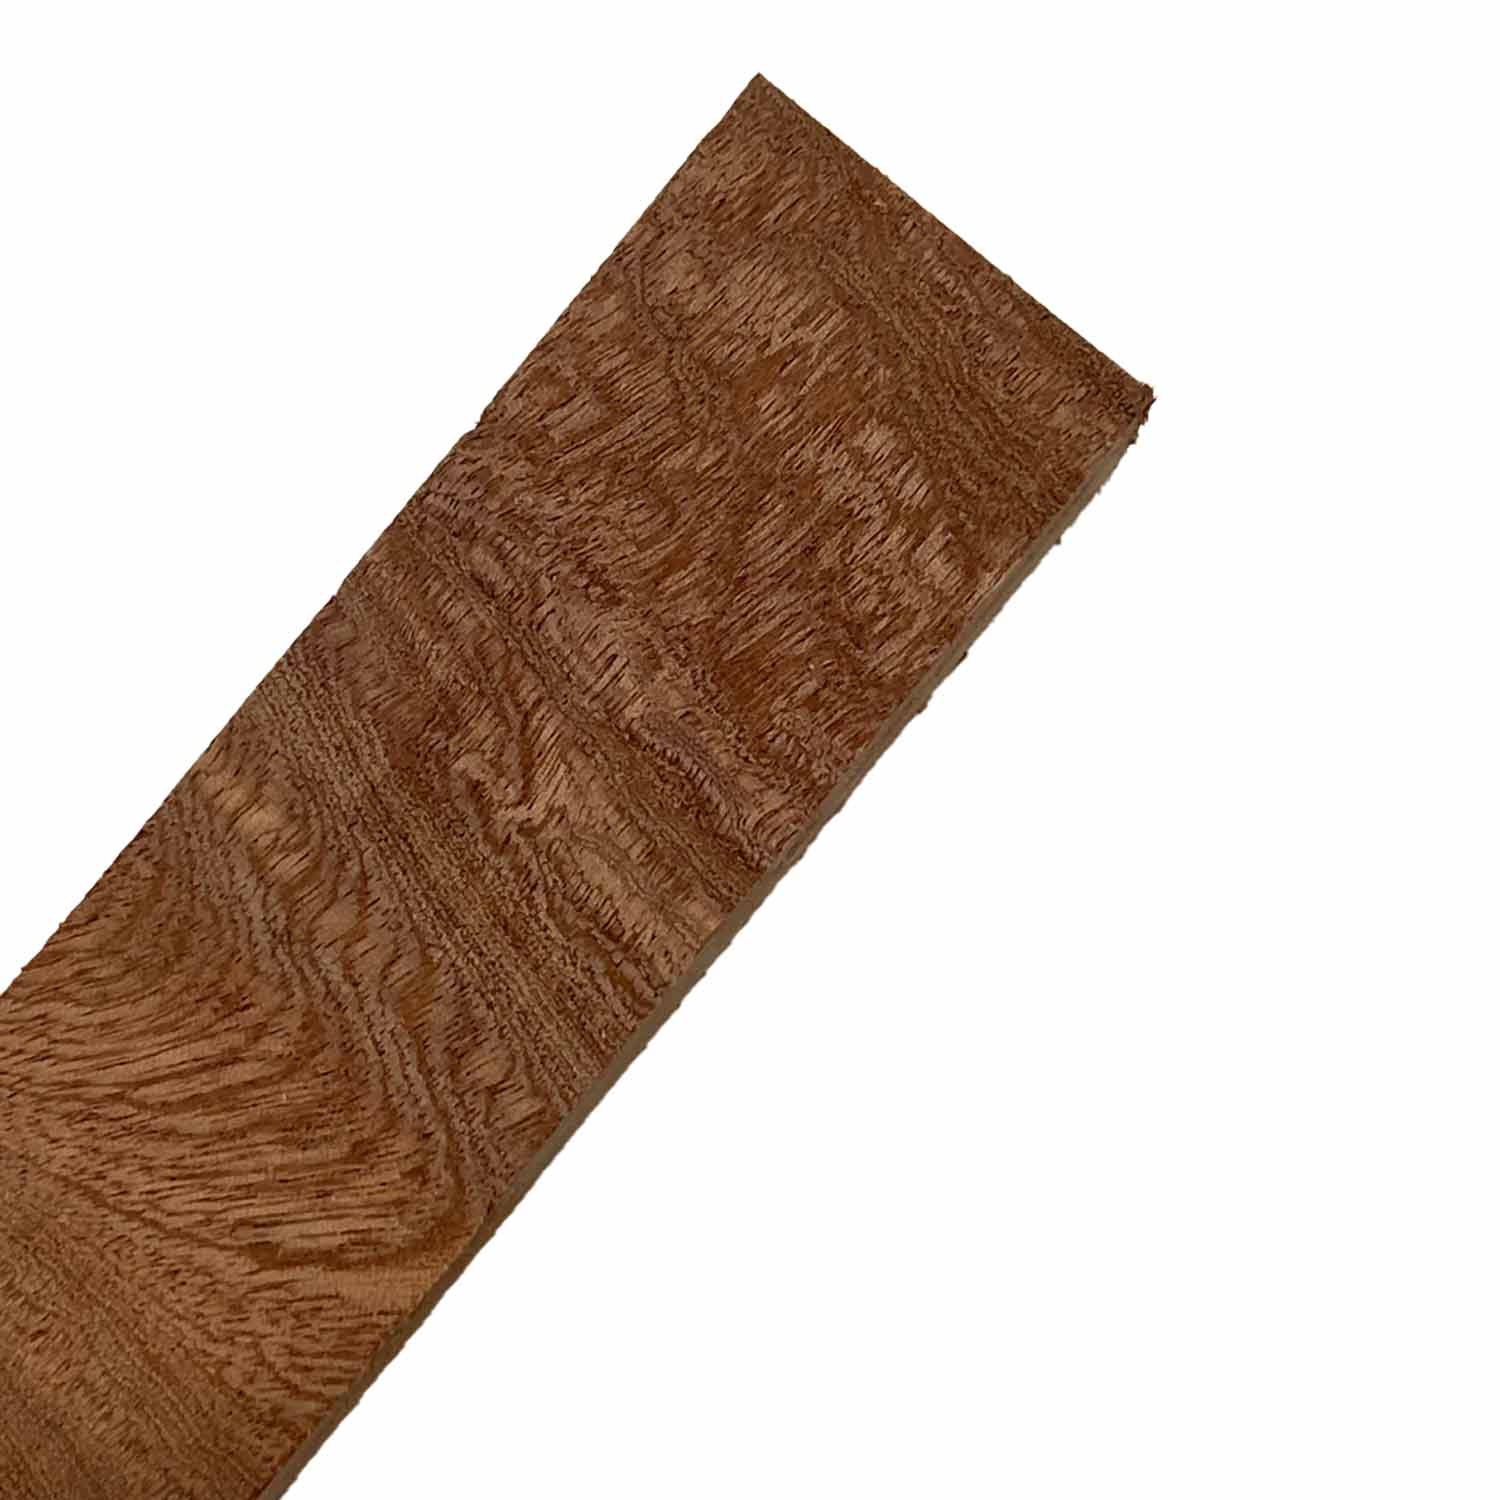 Quilted Curly Sapele Turning Wood Blanks - Exotic Wood Zone - Buy online Across USA 